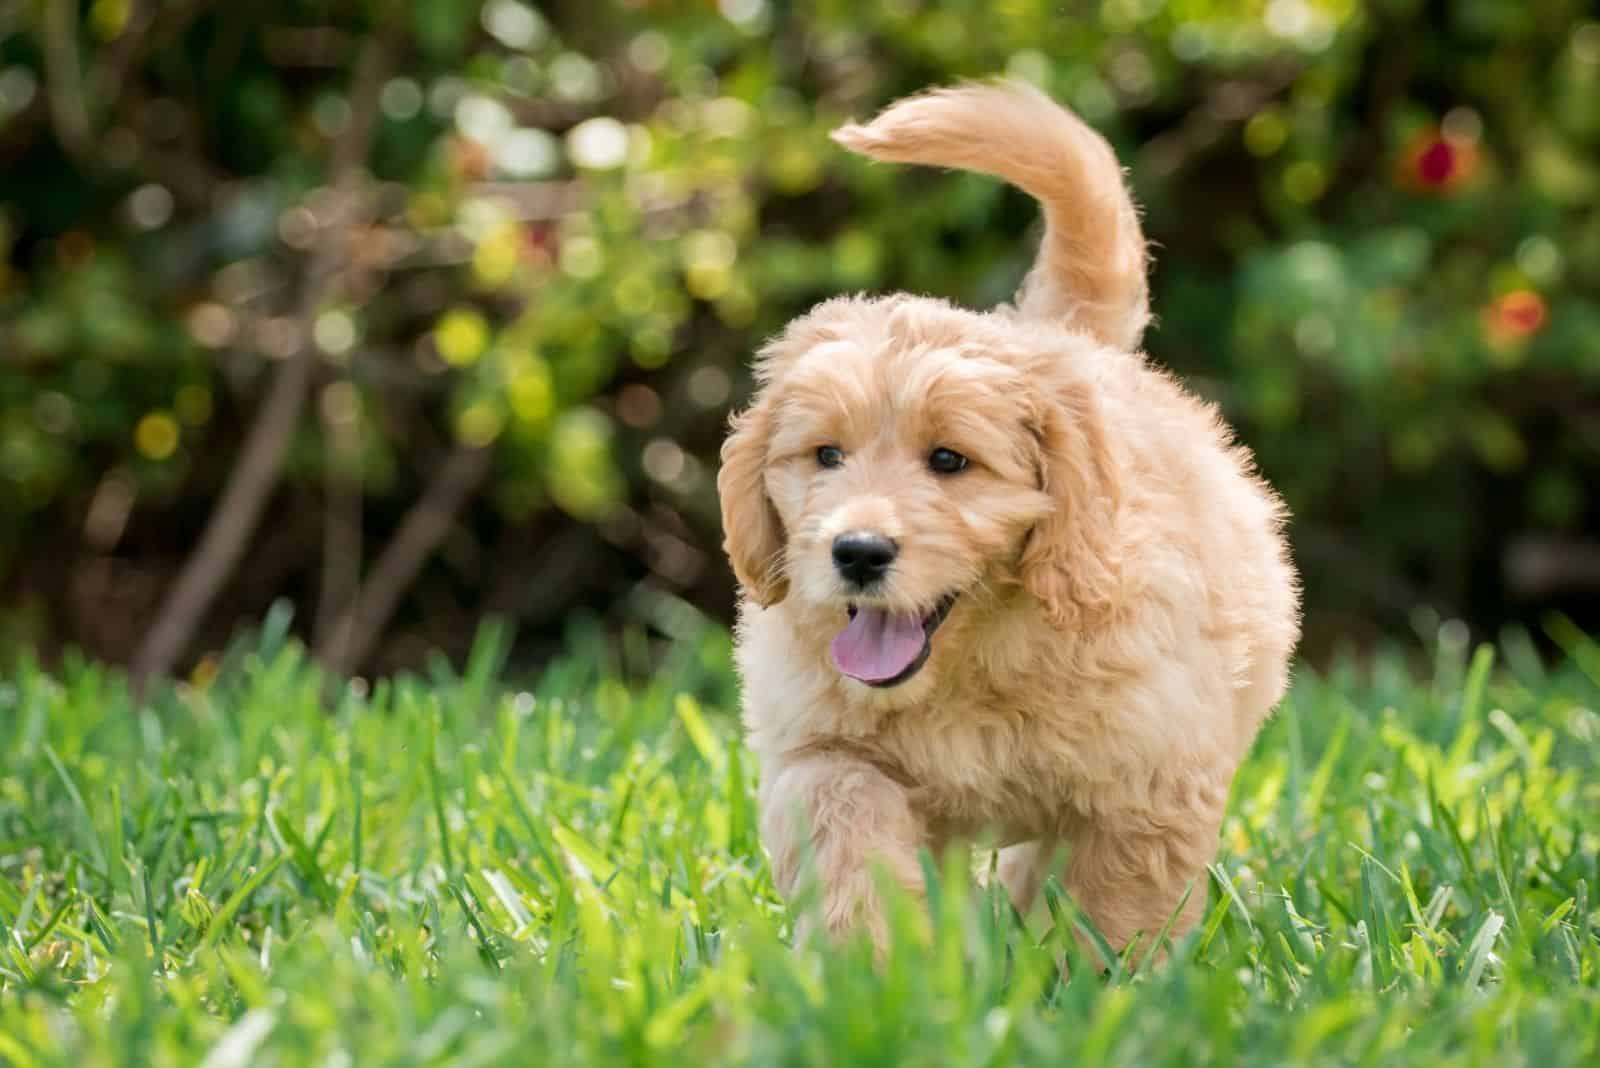 Goldendoodle puppy runs across the field